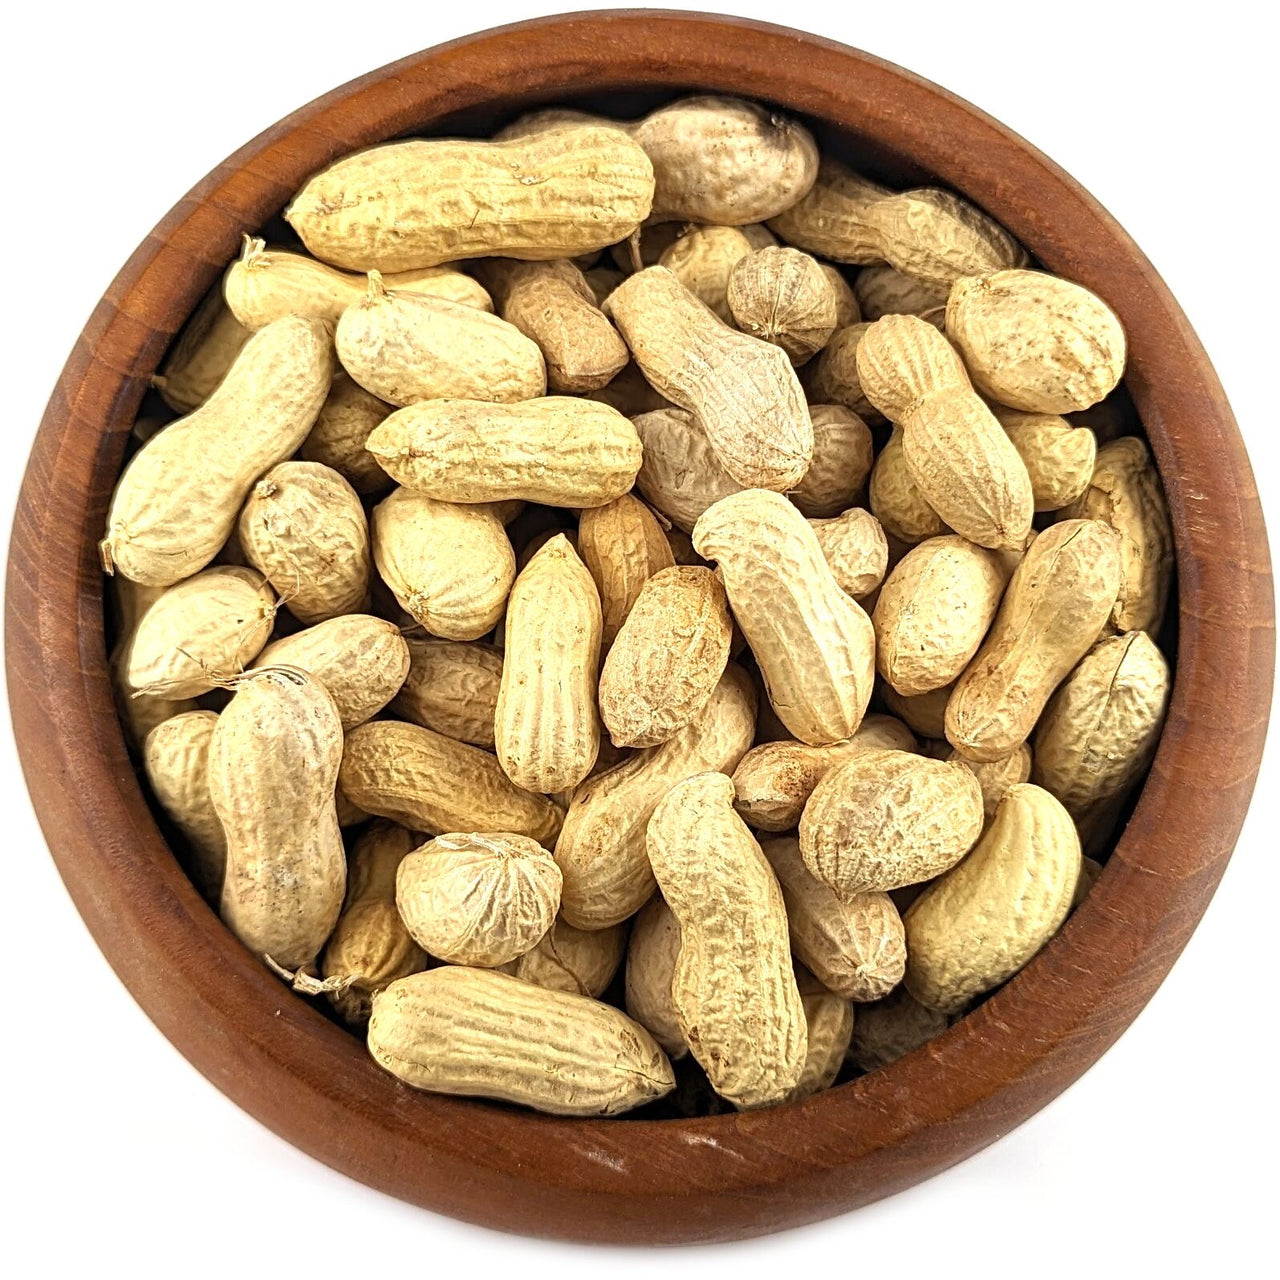 Peanuts in Shell, 1kg Loose